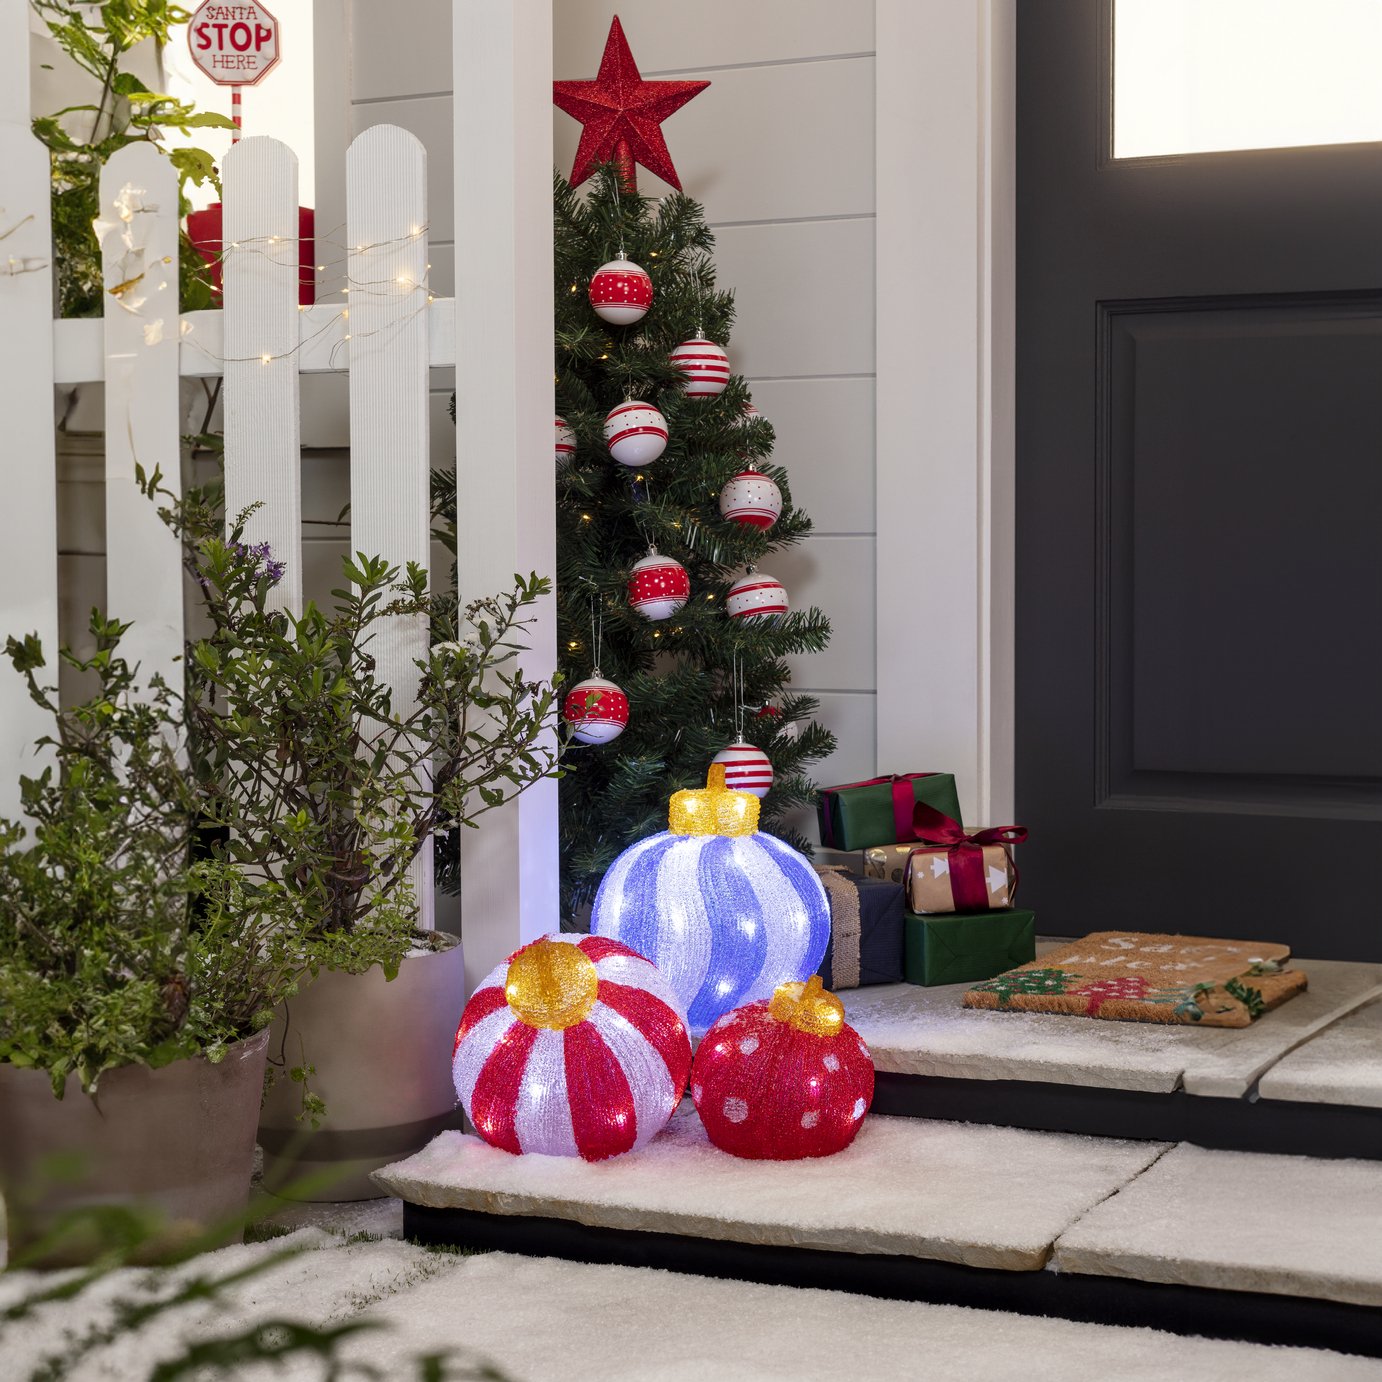 Argos Home Light Up Bauble Christmas Decorations